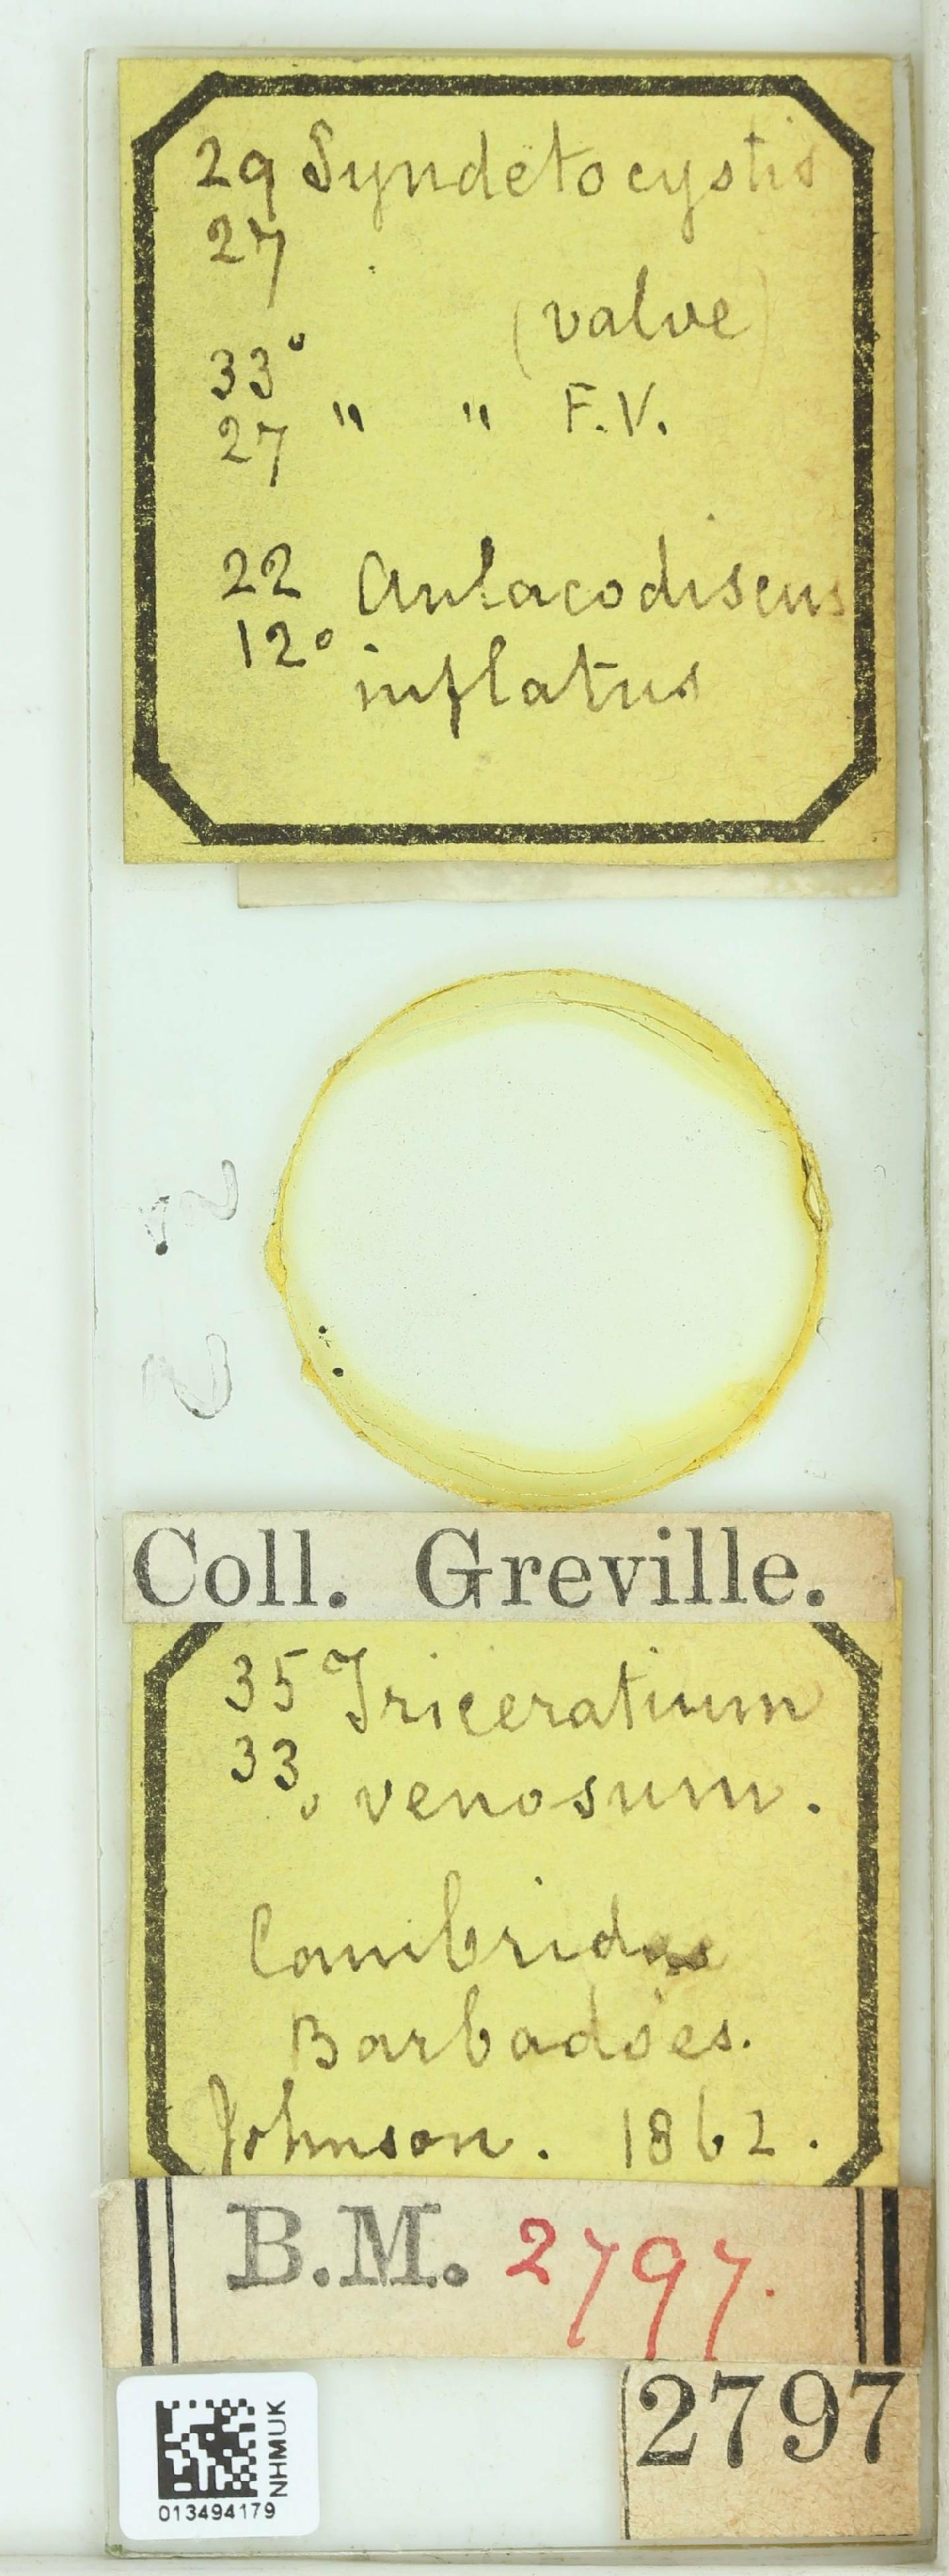 To NHMUK collection (Syndetocystis grevilleanus Grev. ex H.H.Chase & W.C.Walker; NHMUK:ecatalogue:4738391)